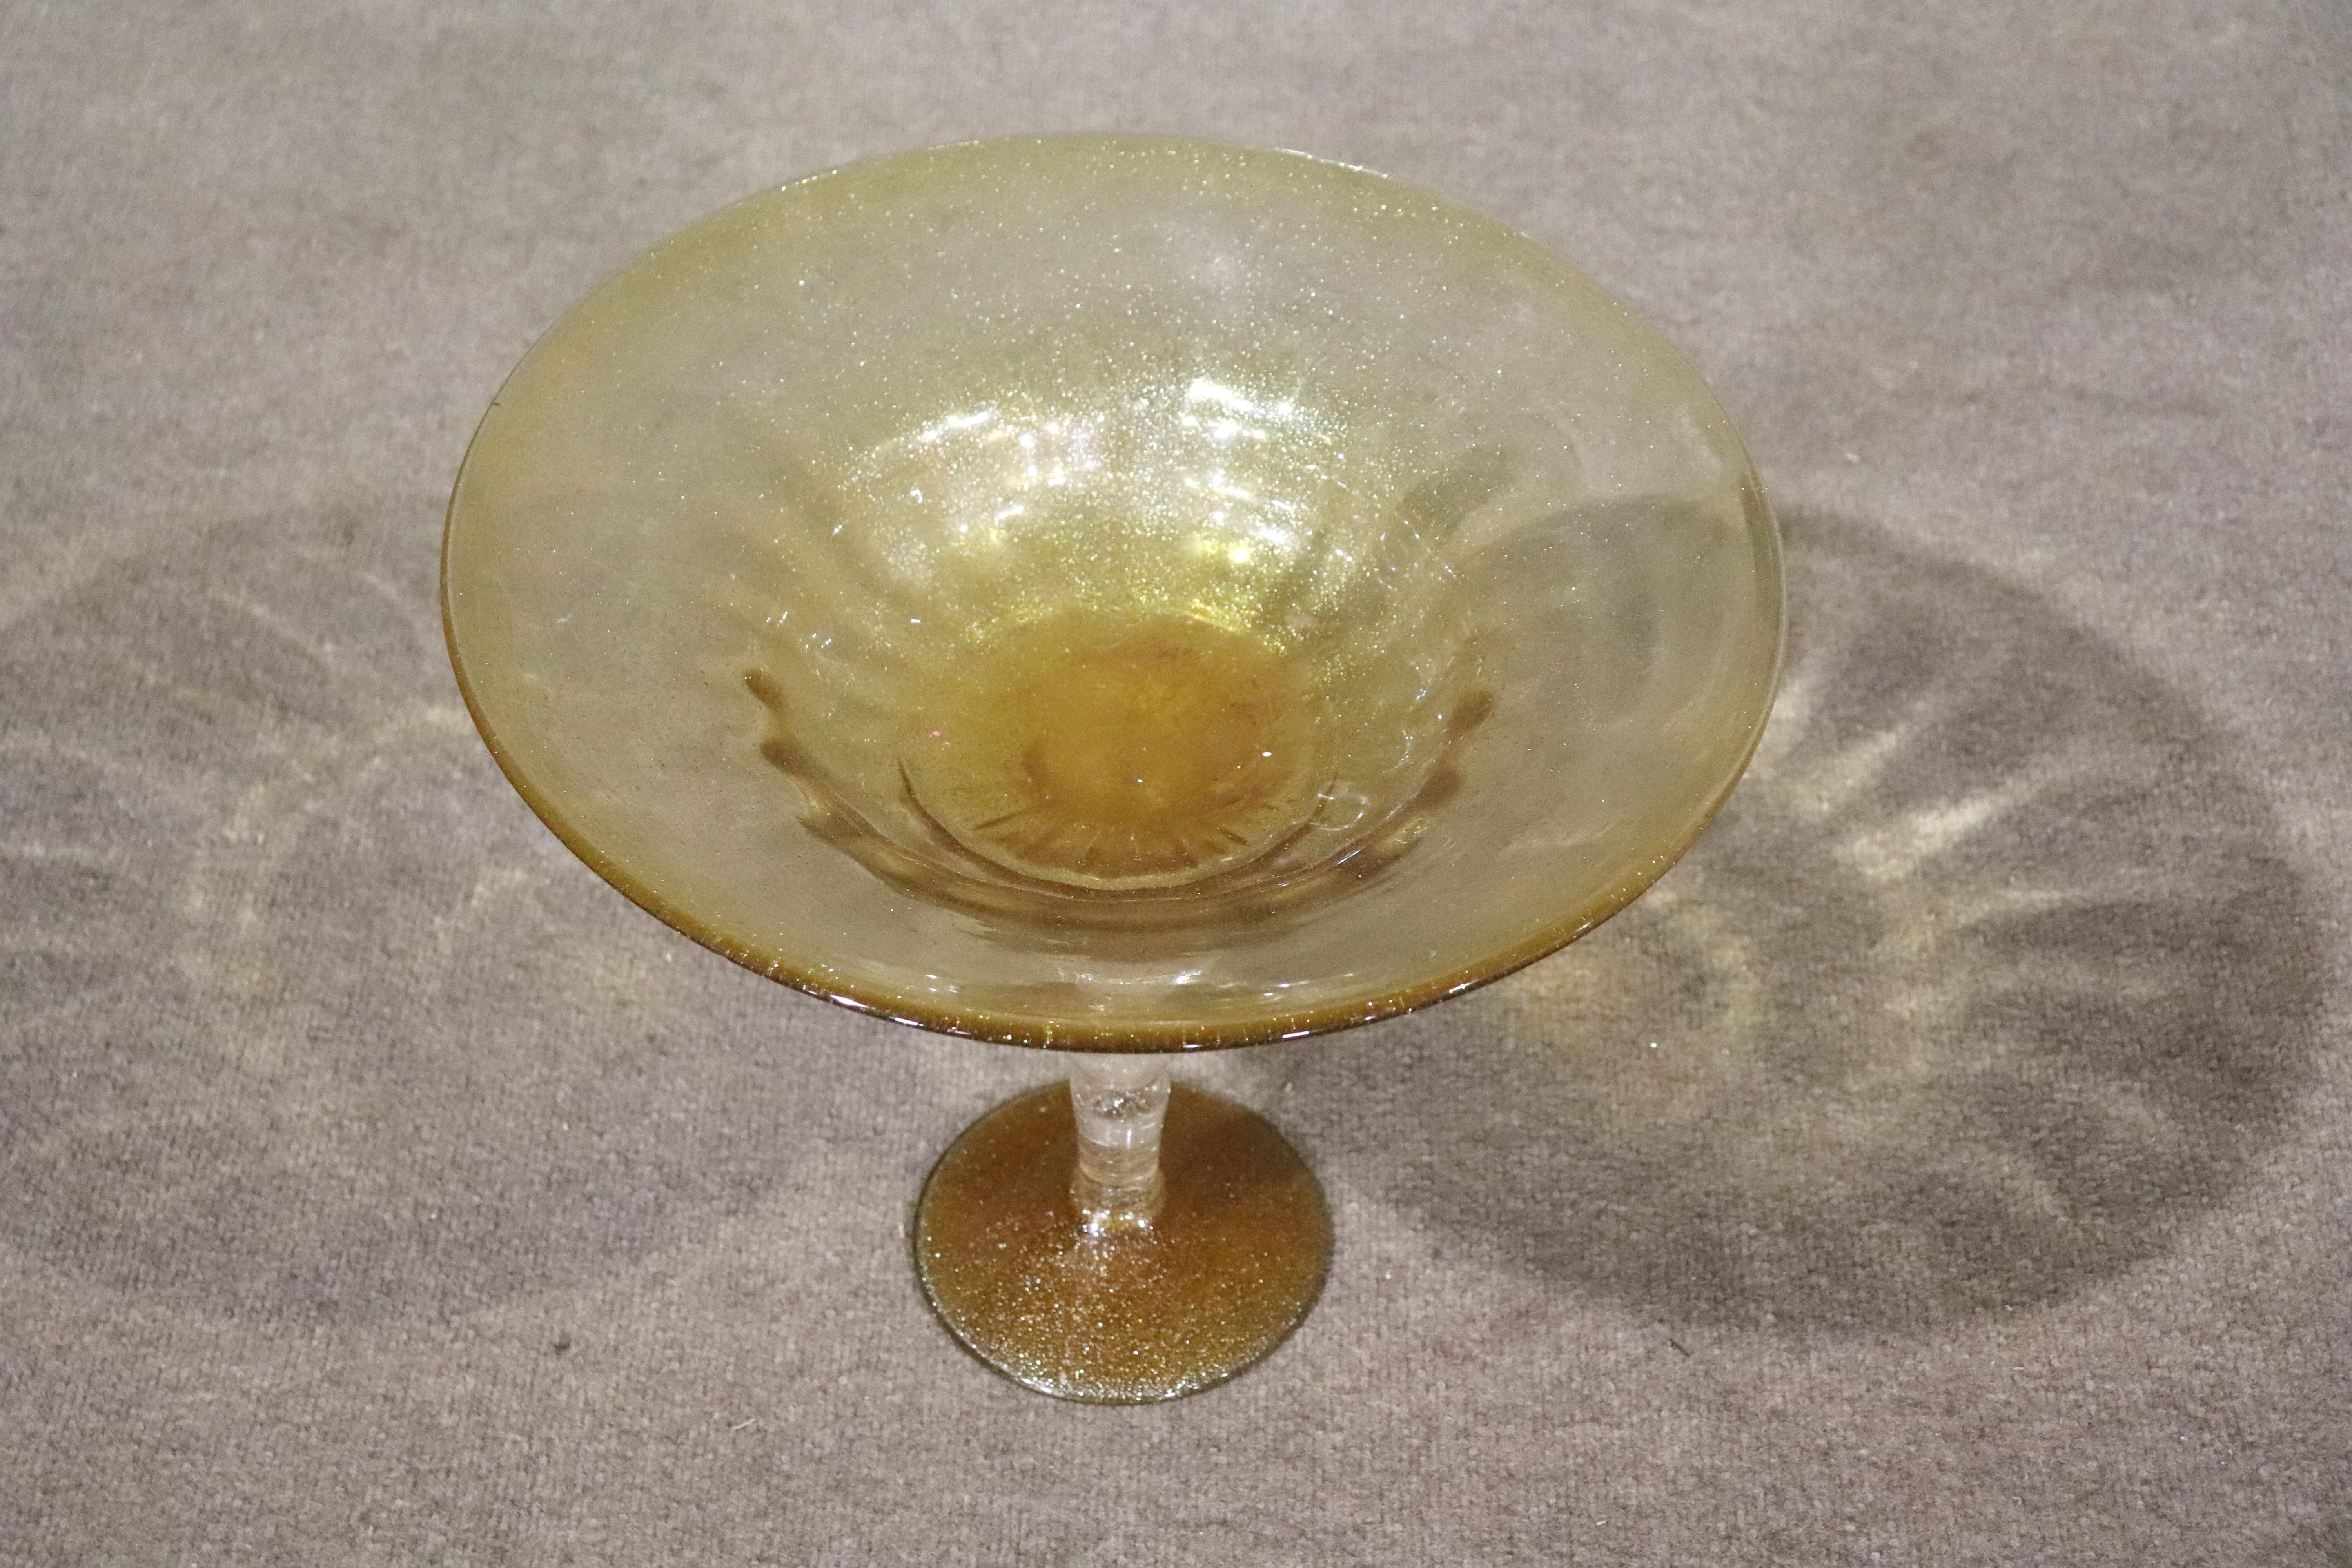 Table centerpiece bowl in glass. Amber and clear speckled glass with a Murano style.
Please confirm location NY or NJ